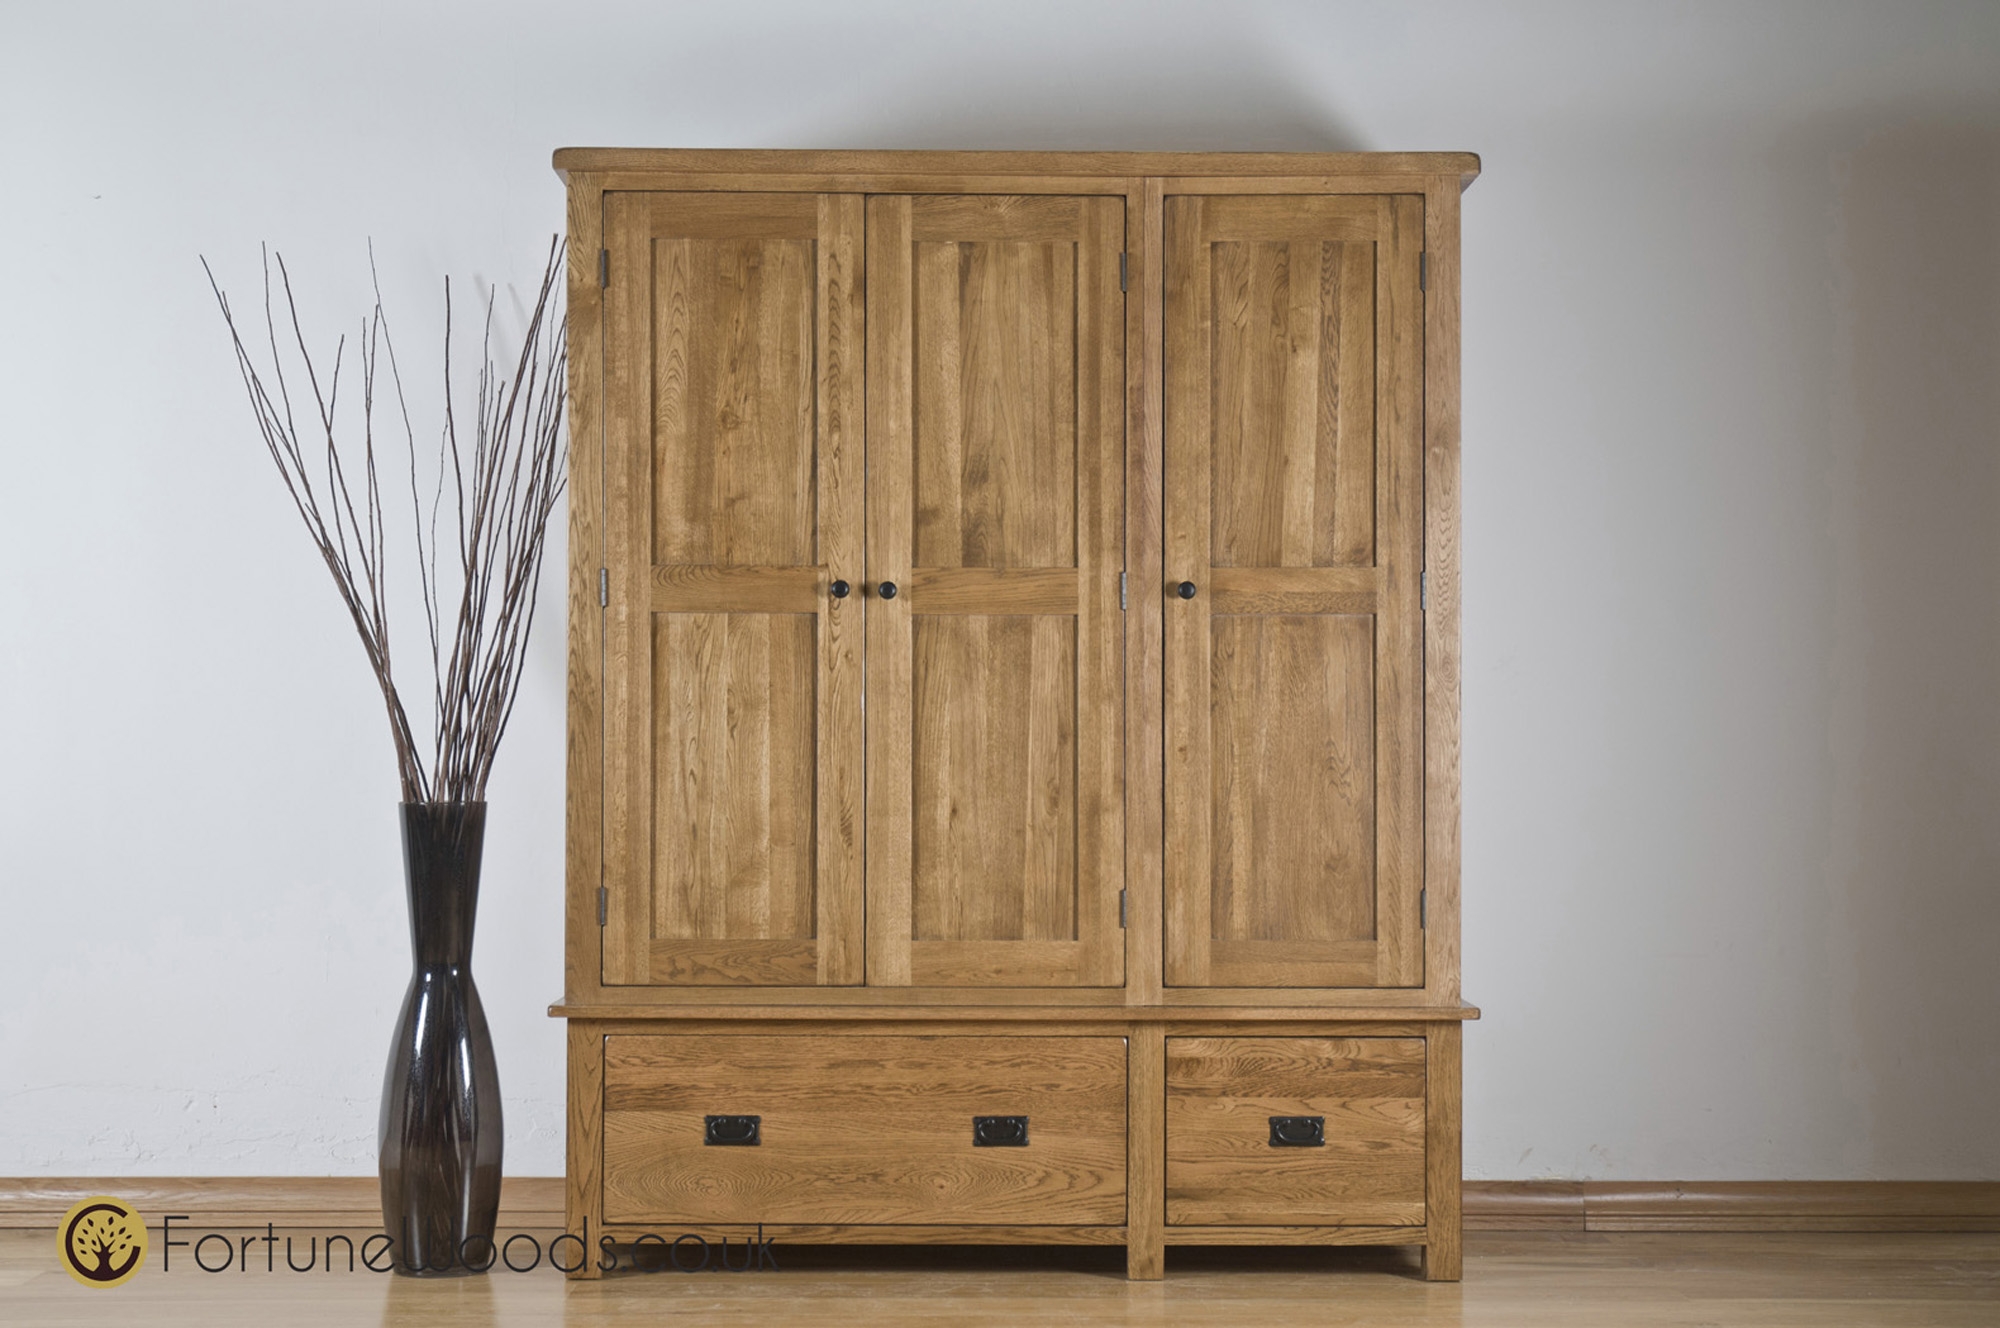 Fortune Woods Rustic Triple Wardrobe With Drawers